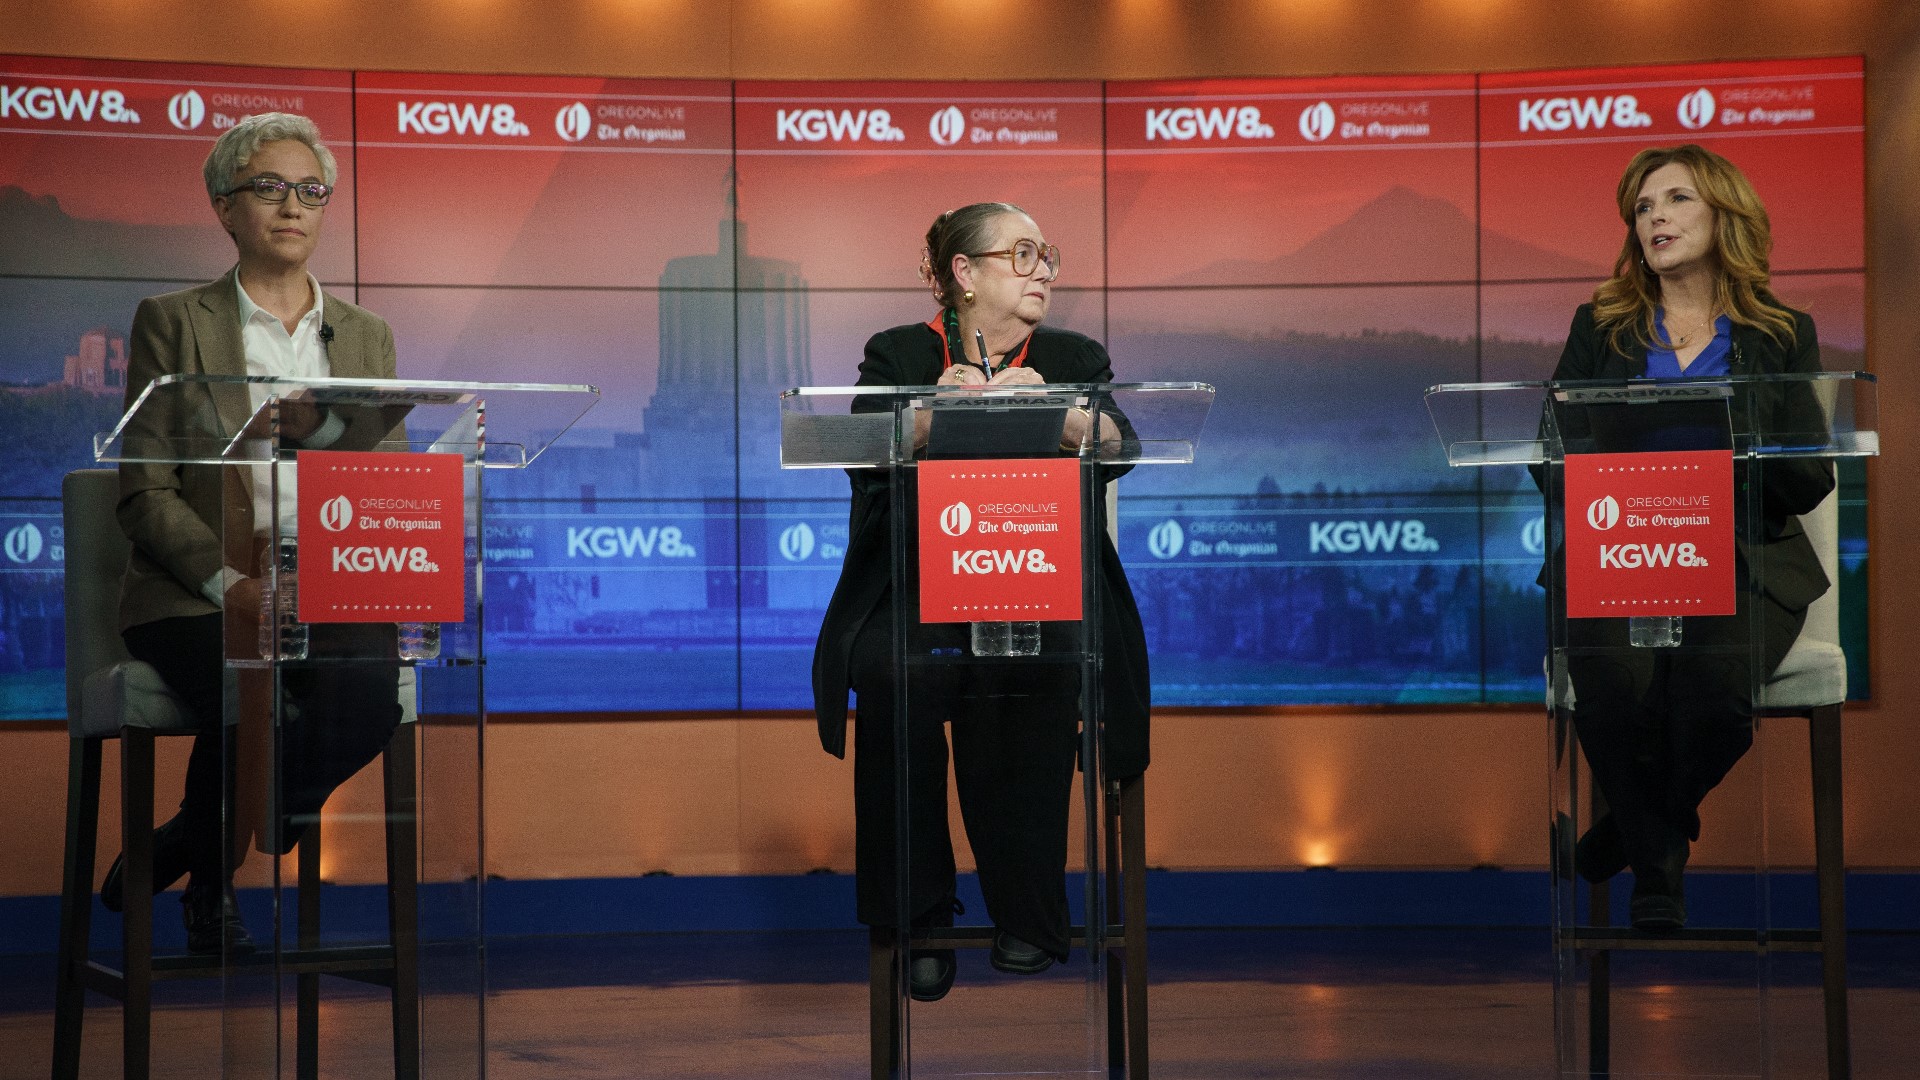 Democrat Tina Kotek faced pointed criticisms from both Republican Christine Drazan and unaffiliated candidate Betsy Johnson during Wednesday night's debate.